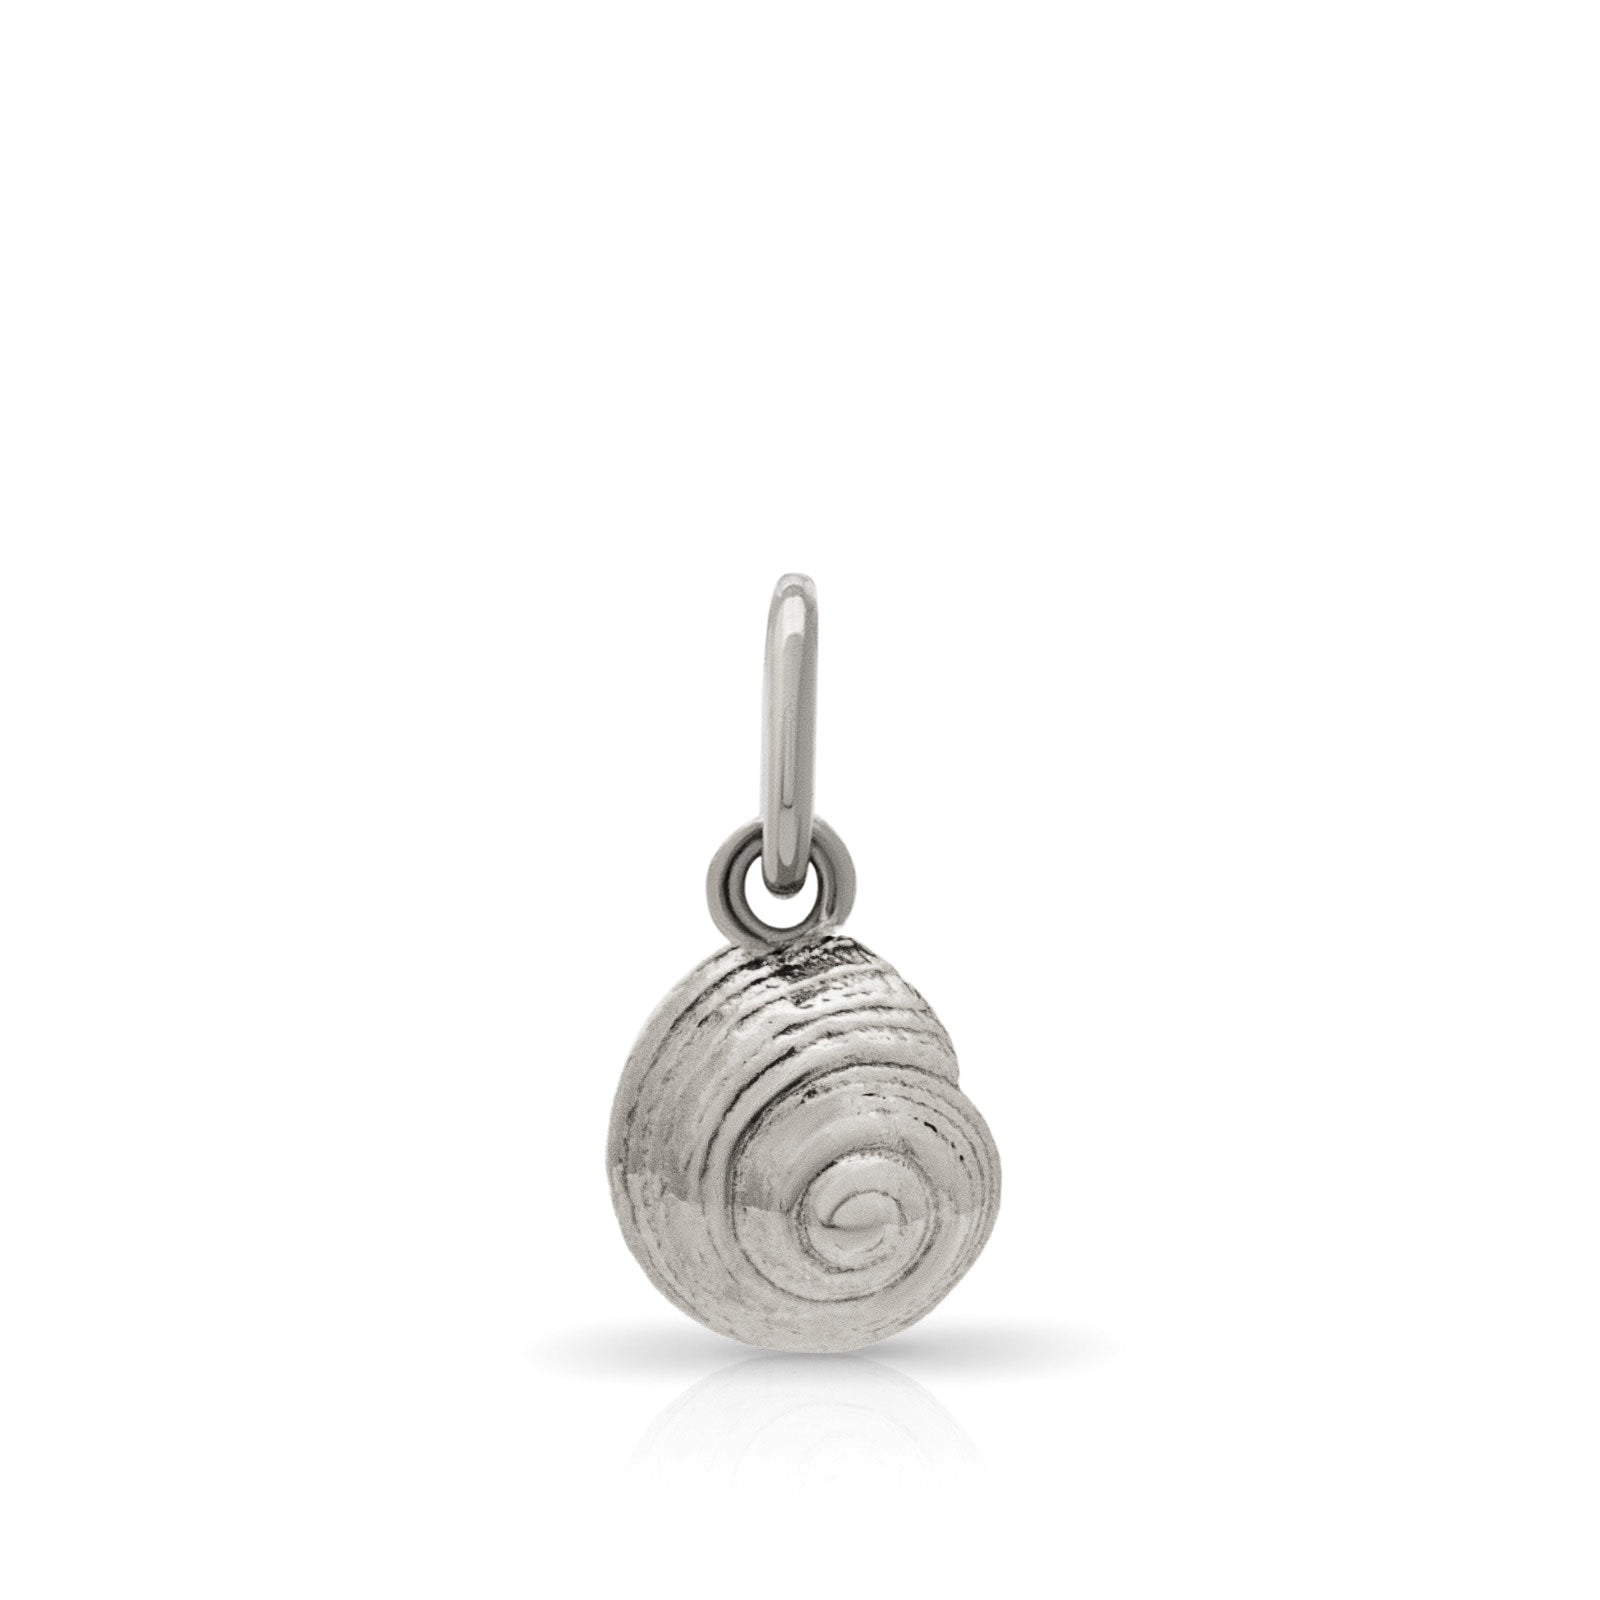 Port Isaac pendant. Port Isaac charm. Port Isaac necklace. Port Isaac Cornwall. Cornwall jewellery. Cornwall shell jewellery. Silver shell jewellery. Gold shell jewellery. Those Happy Places. Serena Ansell Jewellery.